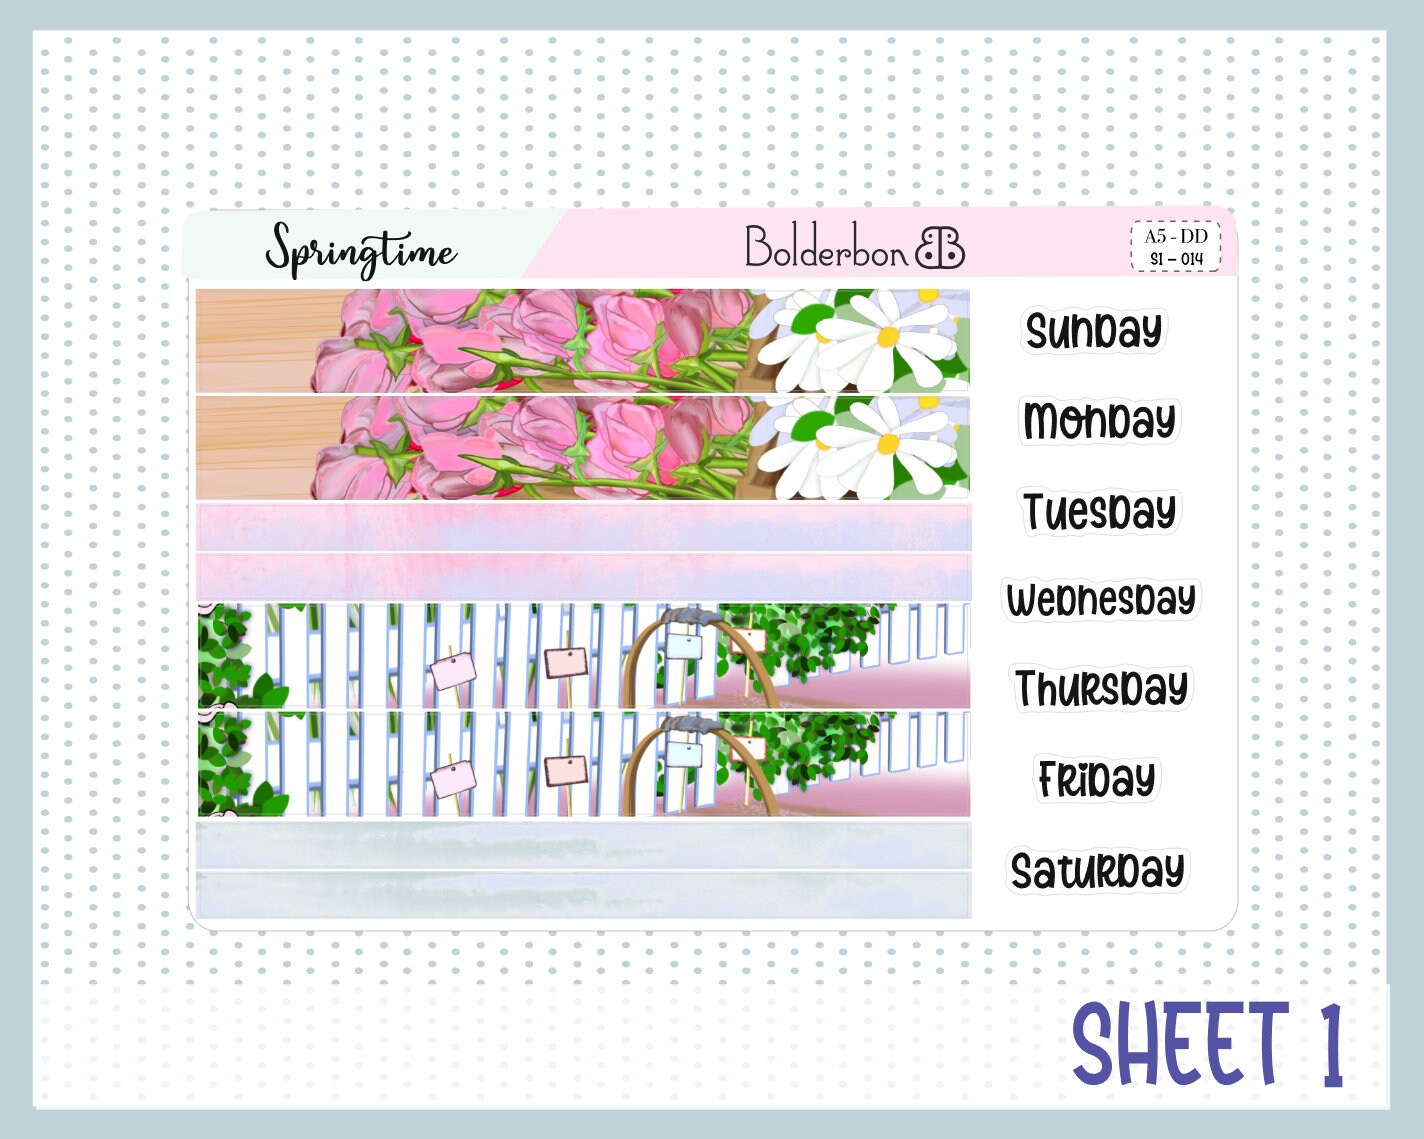 SPRINGTIME || A5 Daily Duo Planner Sticker Kit